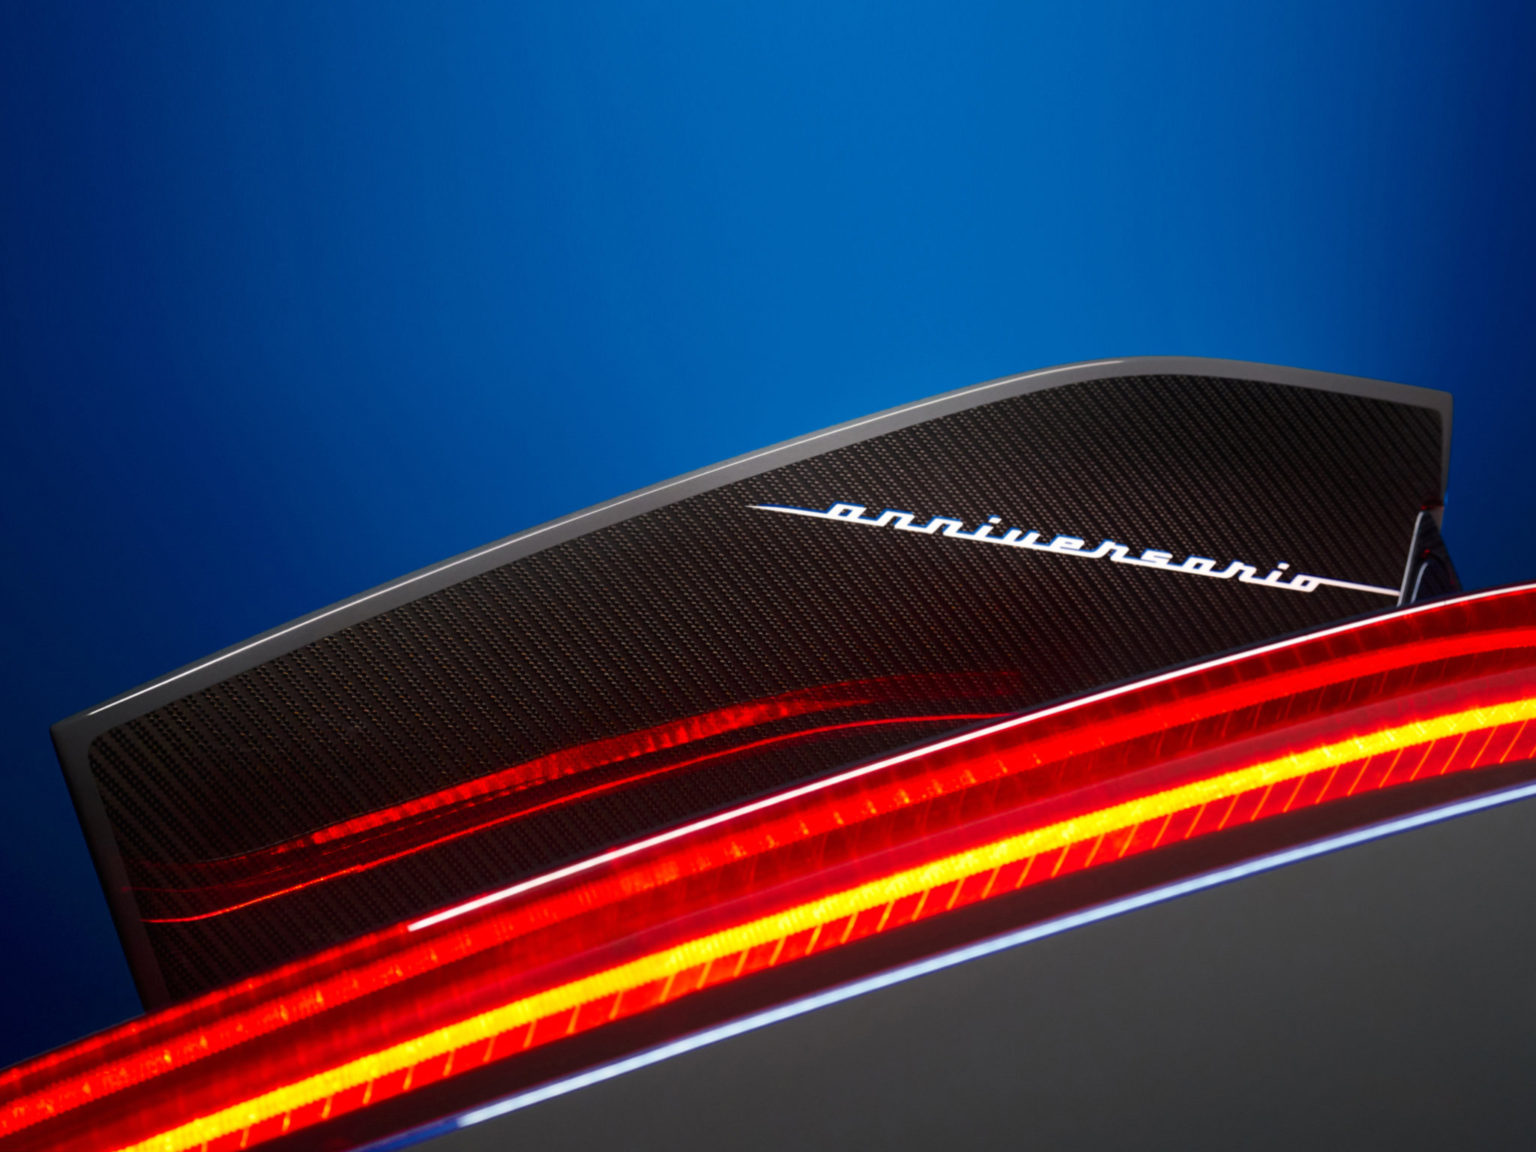 Ahead of its debut at the Geneva International Motor Show in March, Automobili Pininfarina is teasing the Battista Anniversario all-electric hypercard